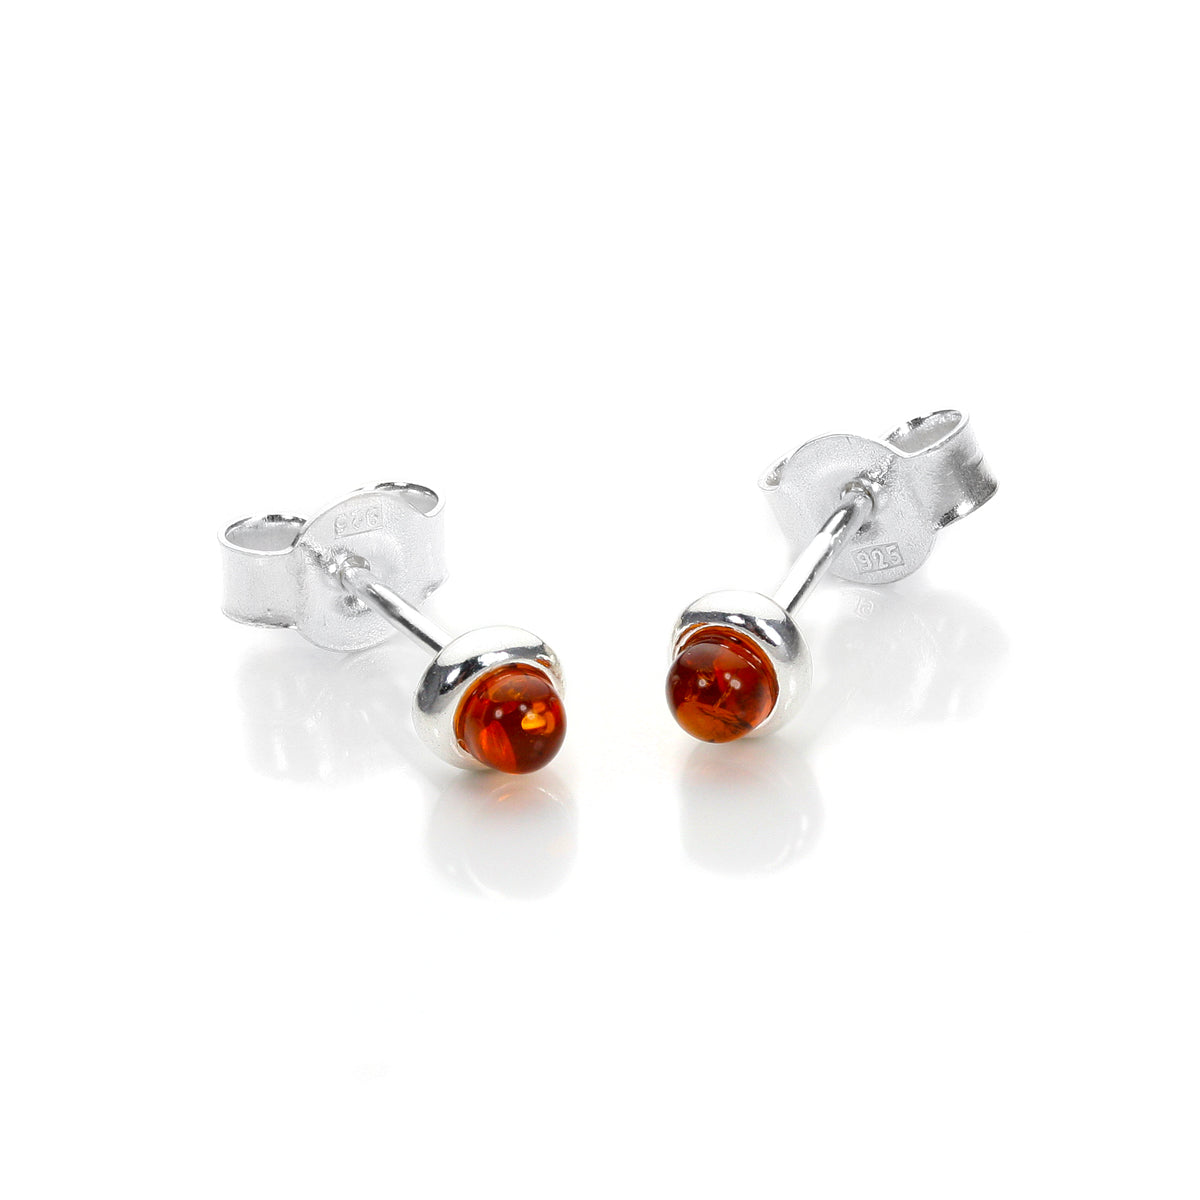 Small Sterling Silver & Baltic Amber Stud Earrings